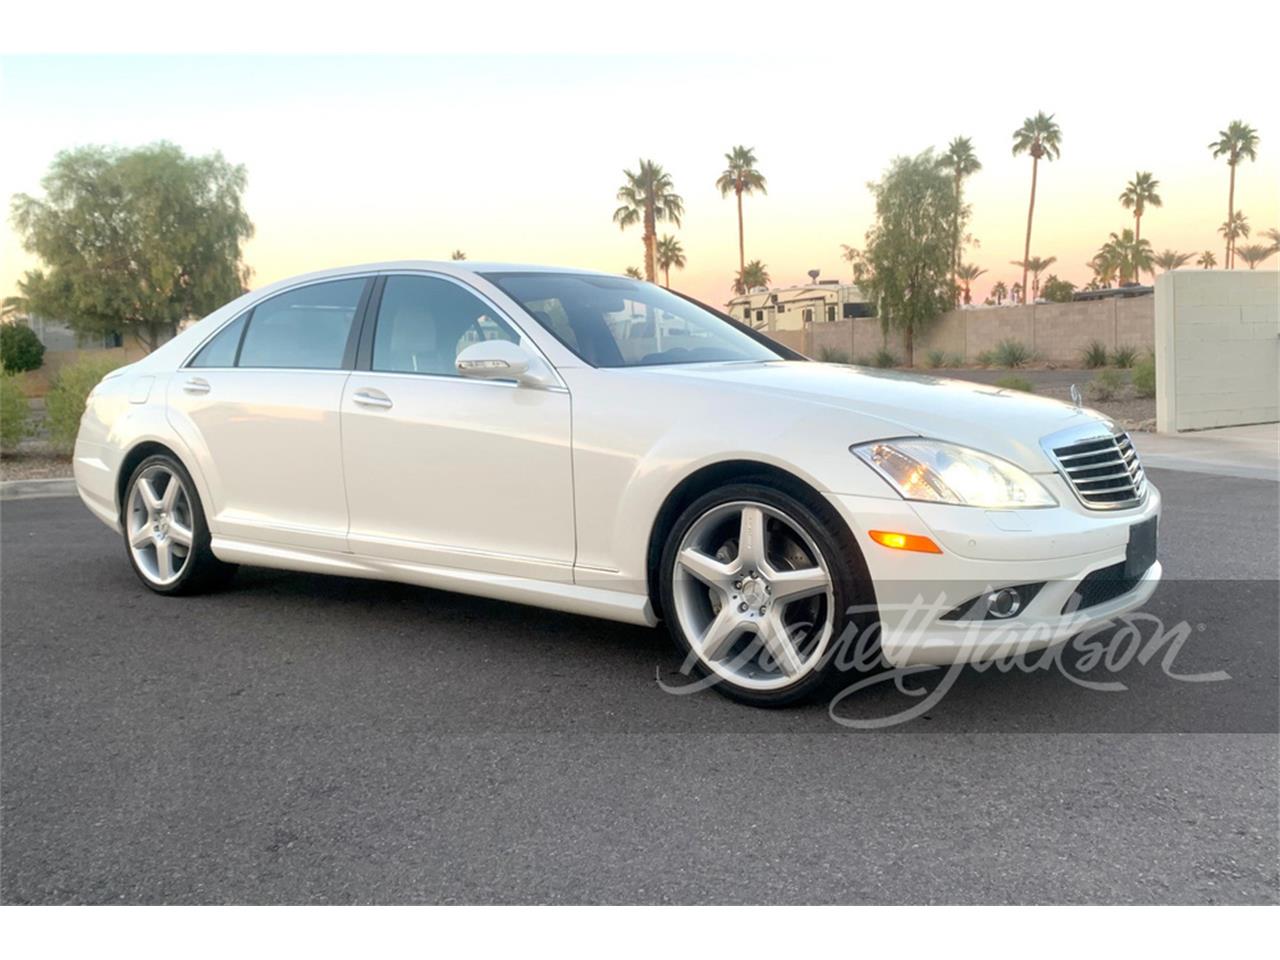 For Sale at Auction: 2009 Mercedes-Benz S550 in Scottsdale, Arizona for sale in Scottsdale, AZ